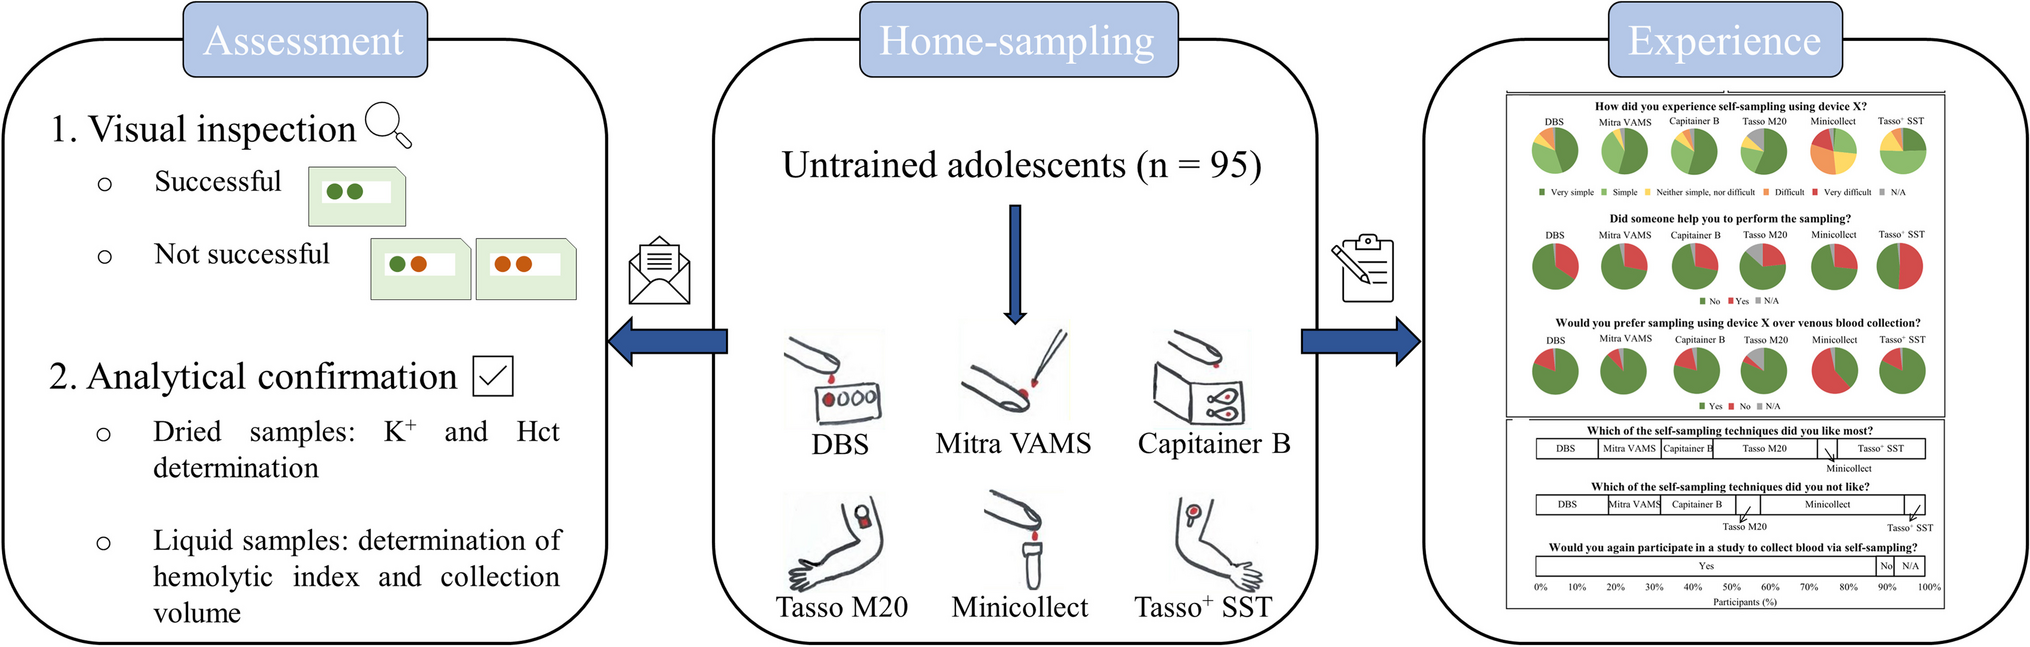 Self-Sampling by Adolescents at Home: Assessment of the Feasibility to Successfully Collect Blood Microsamples by Inexperienced Individuals